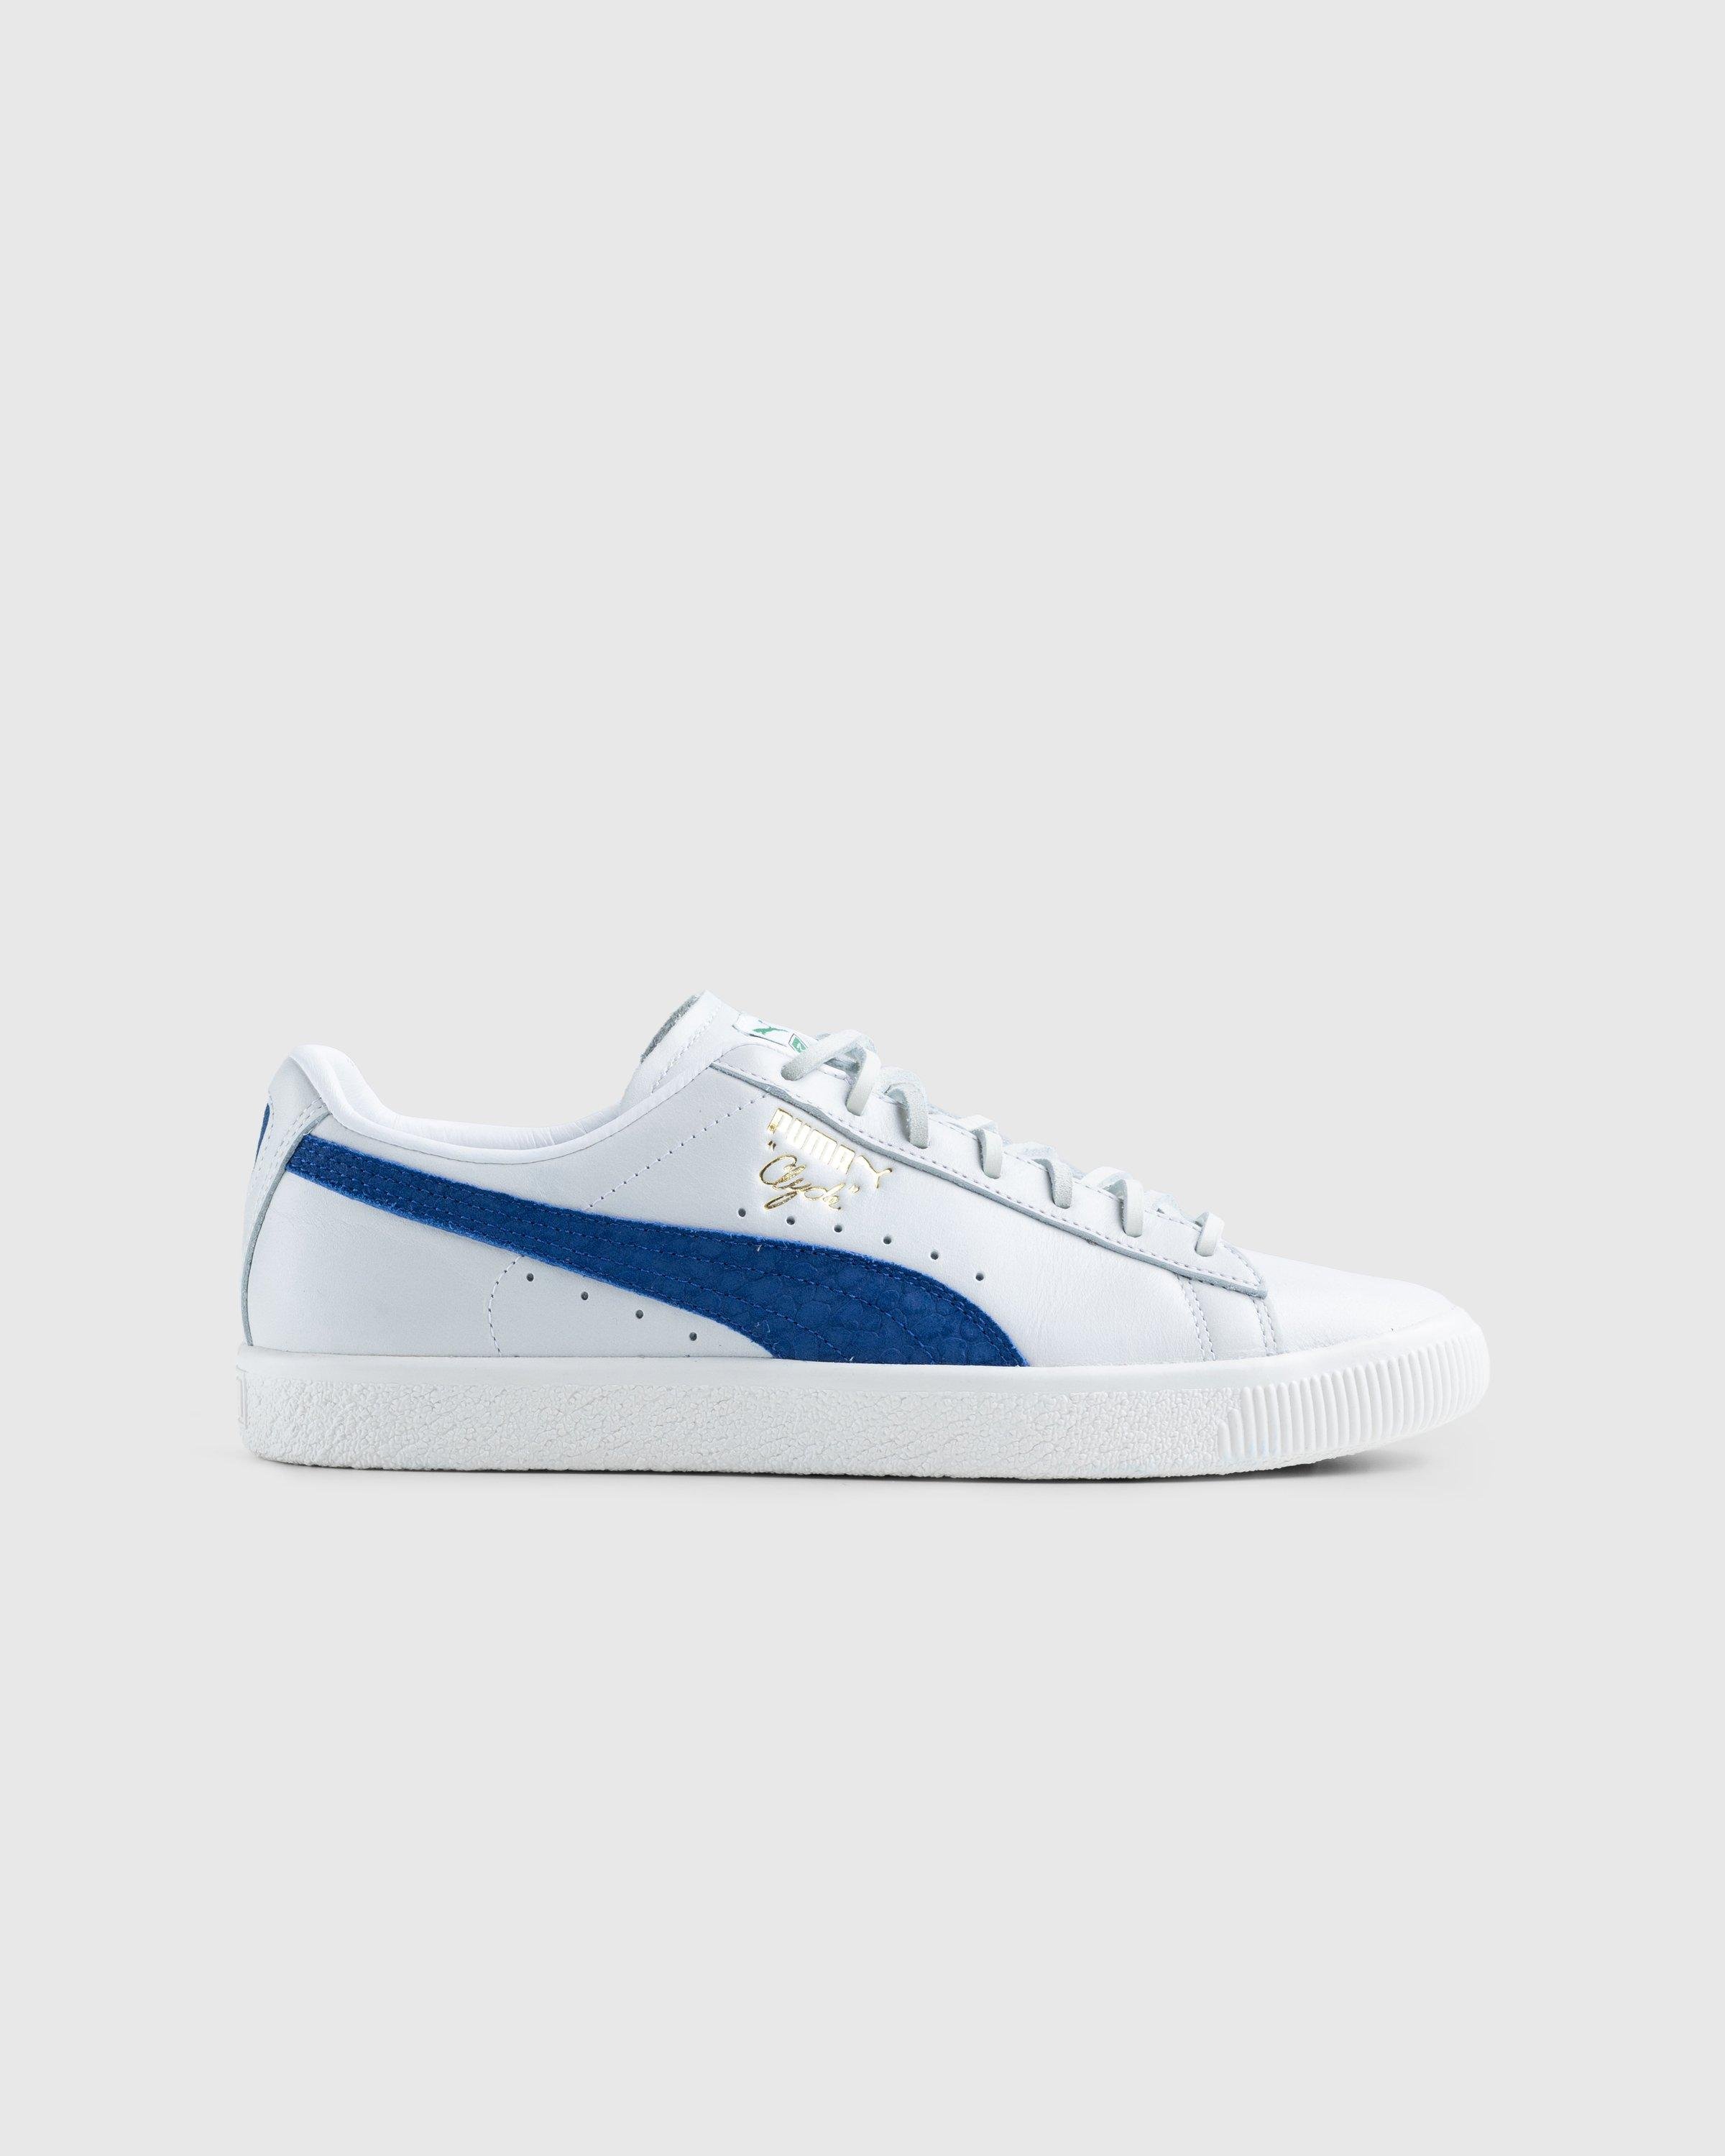 Clyde Soho London Frosted Ivory/New Navy by PUMA